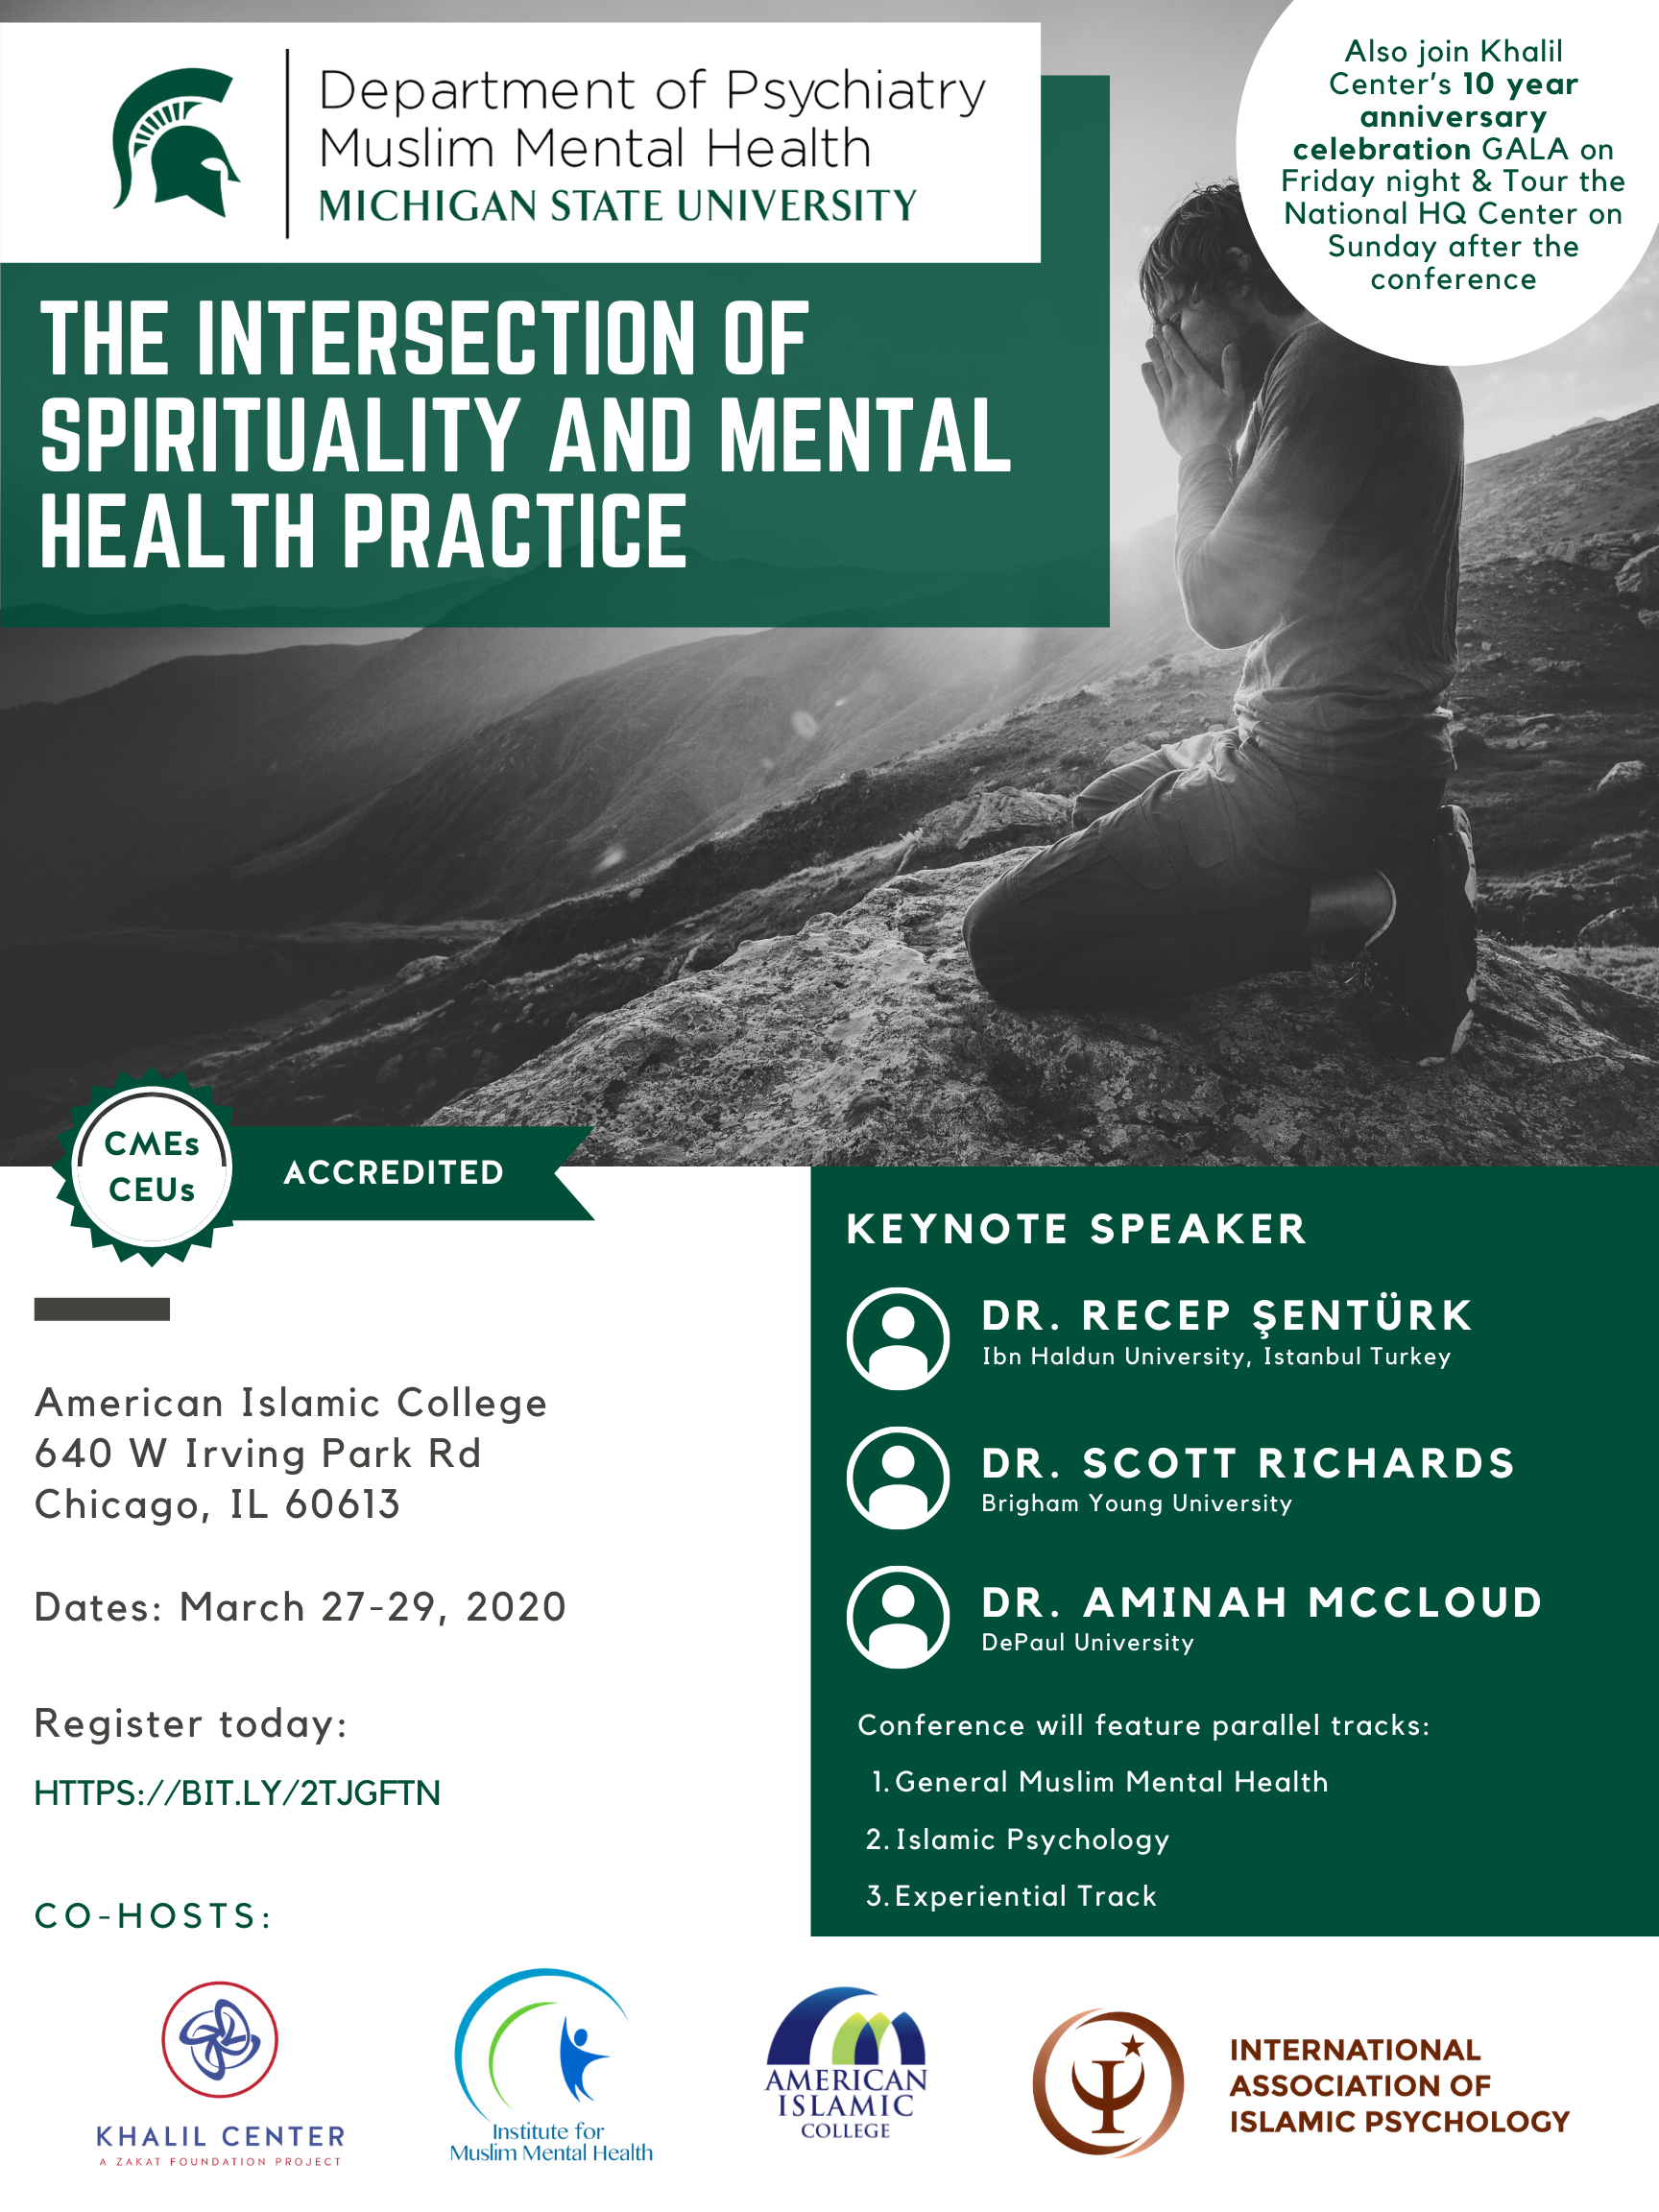 Conference Institute for Muslim Mental Health